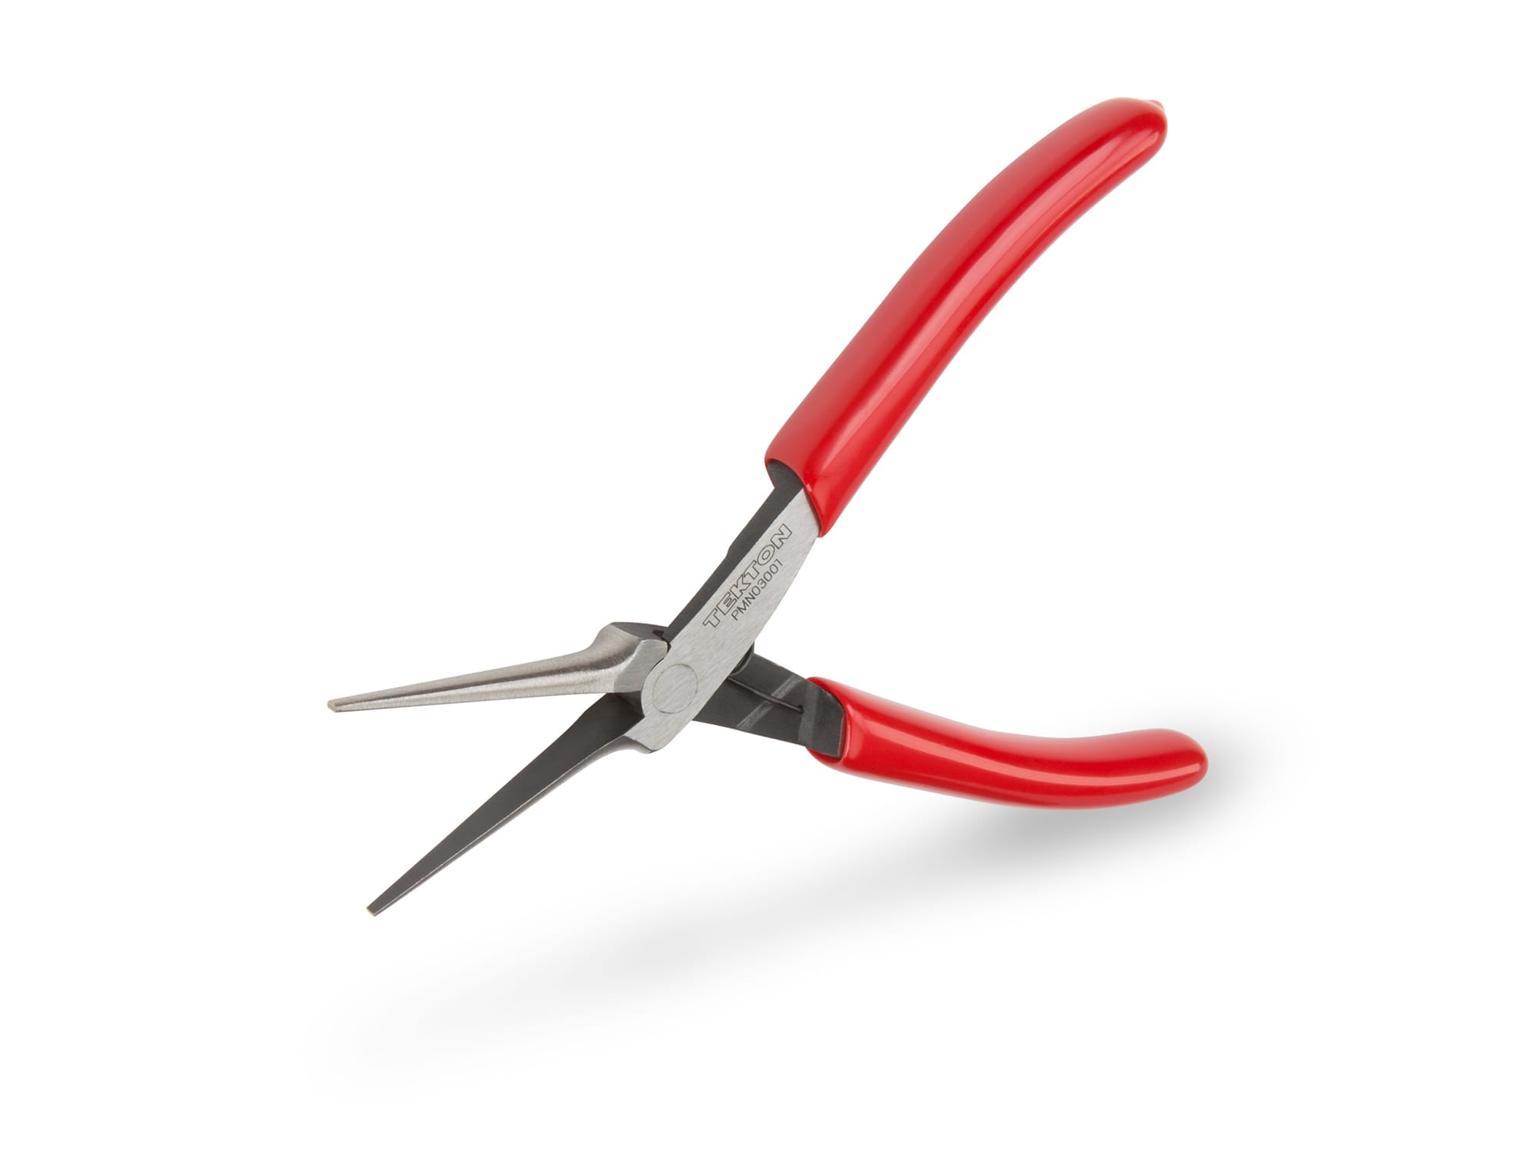 Mini Needle Nose Pliers (Smooth Jaw)